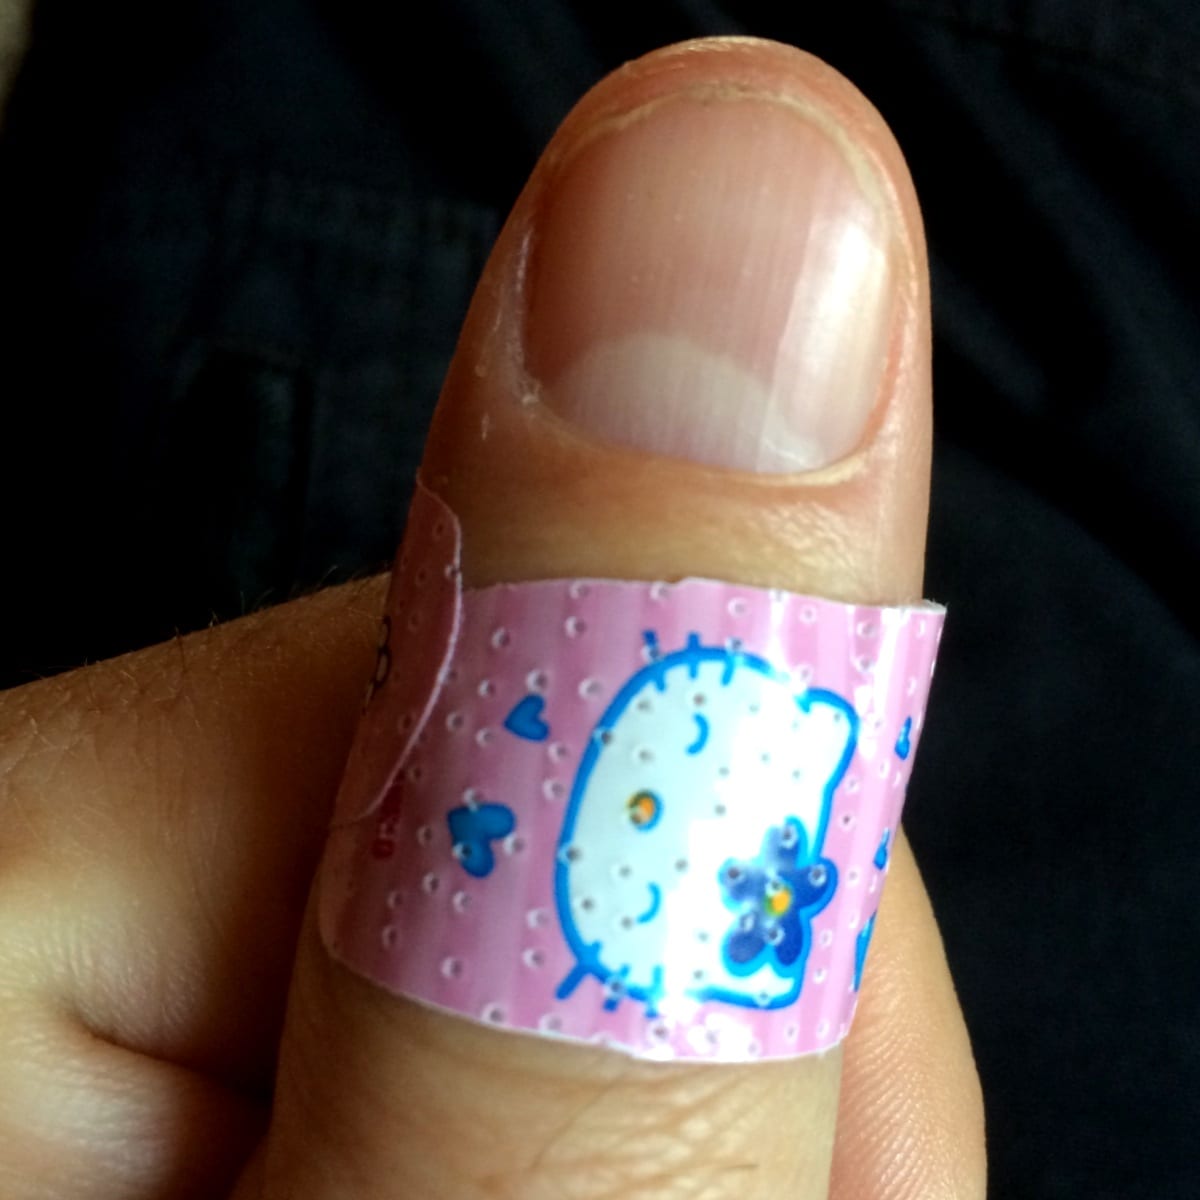 Lily has taken my Band-Aid game to a whole new level